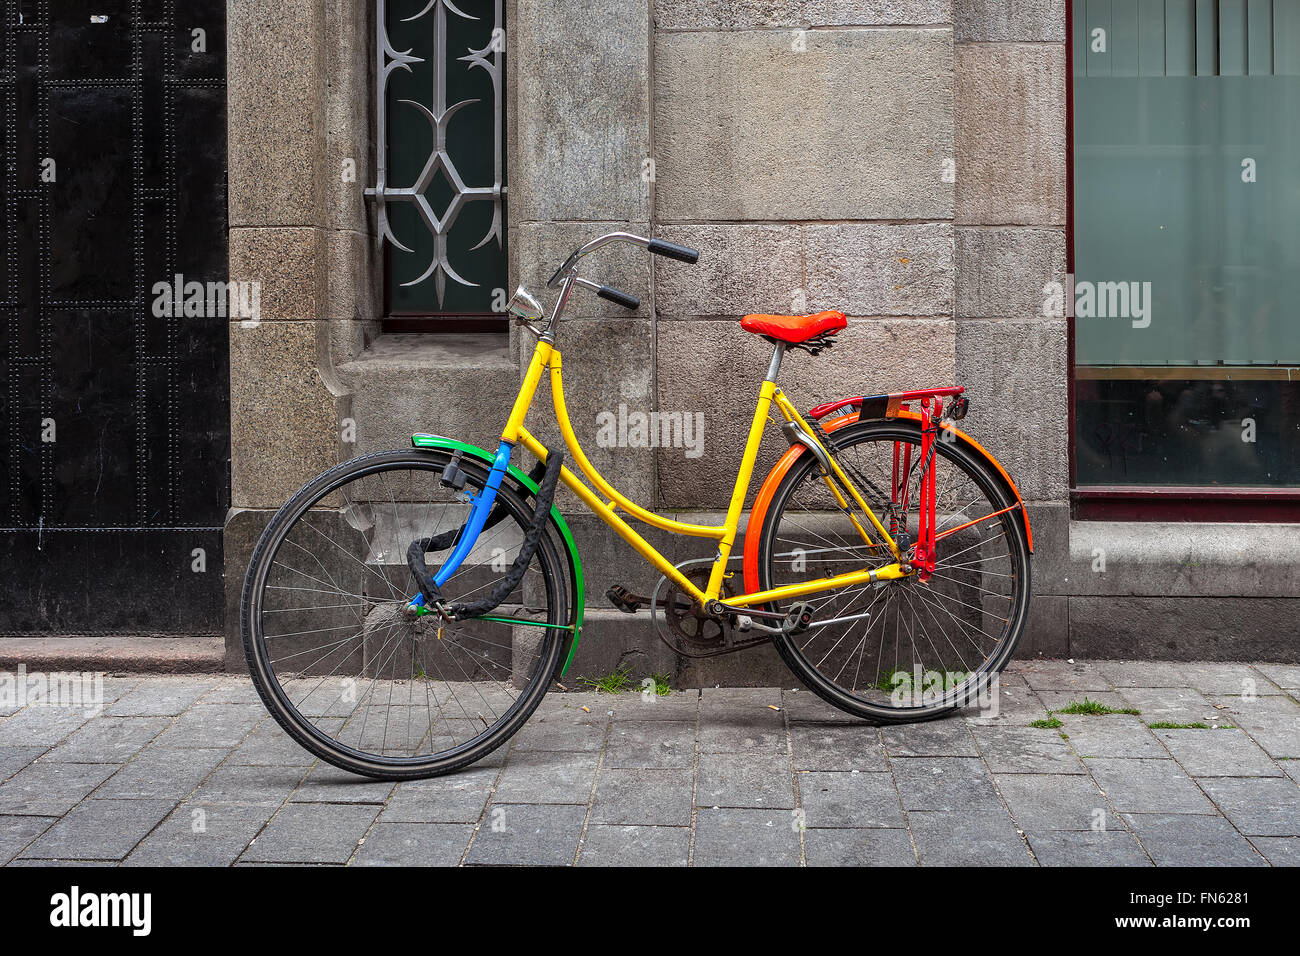 Colorful bicycle leaning against the wall in Amsterdam, Netherlands. Stock Photo